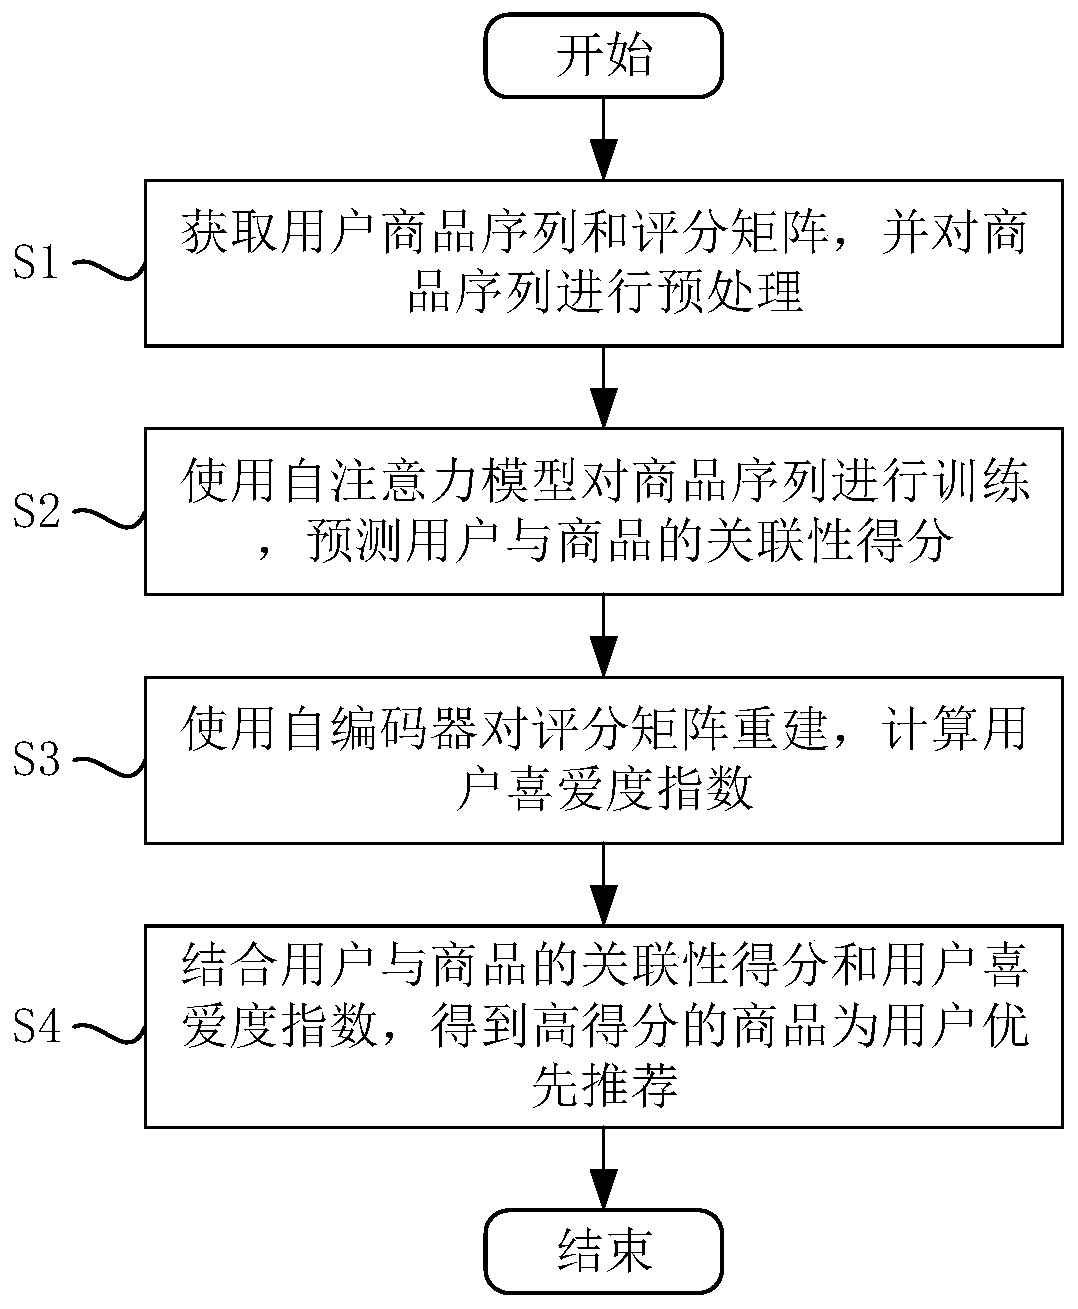 Sequence recommendation method based on self-attention auto-encoder